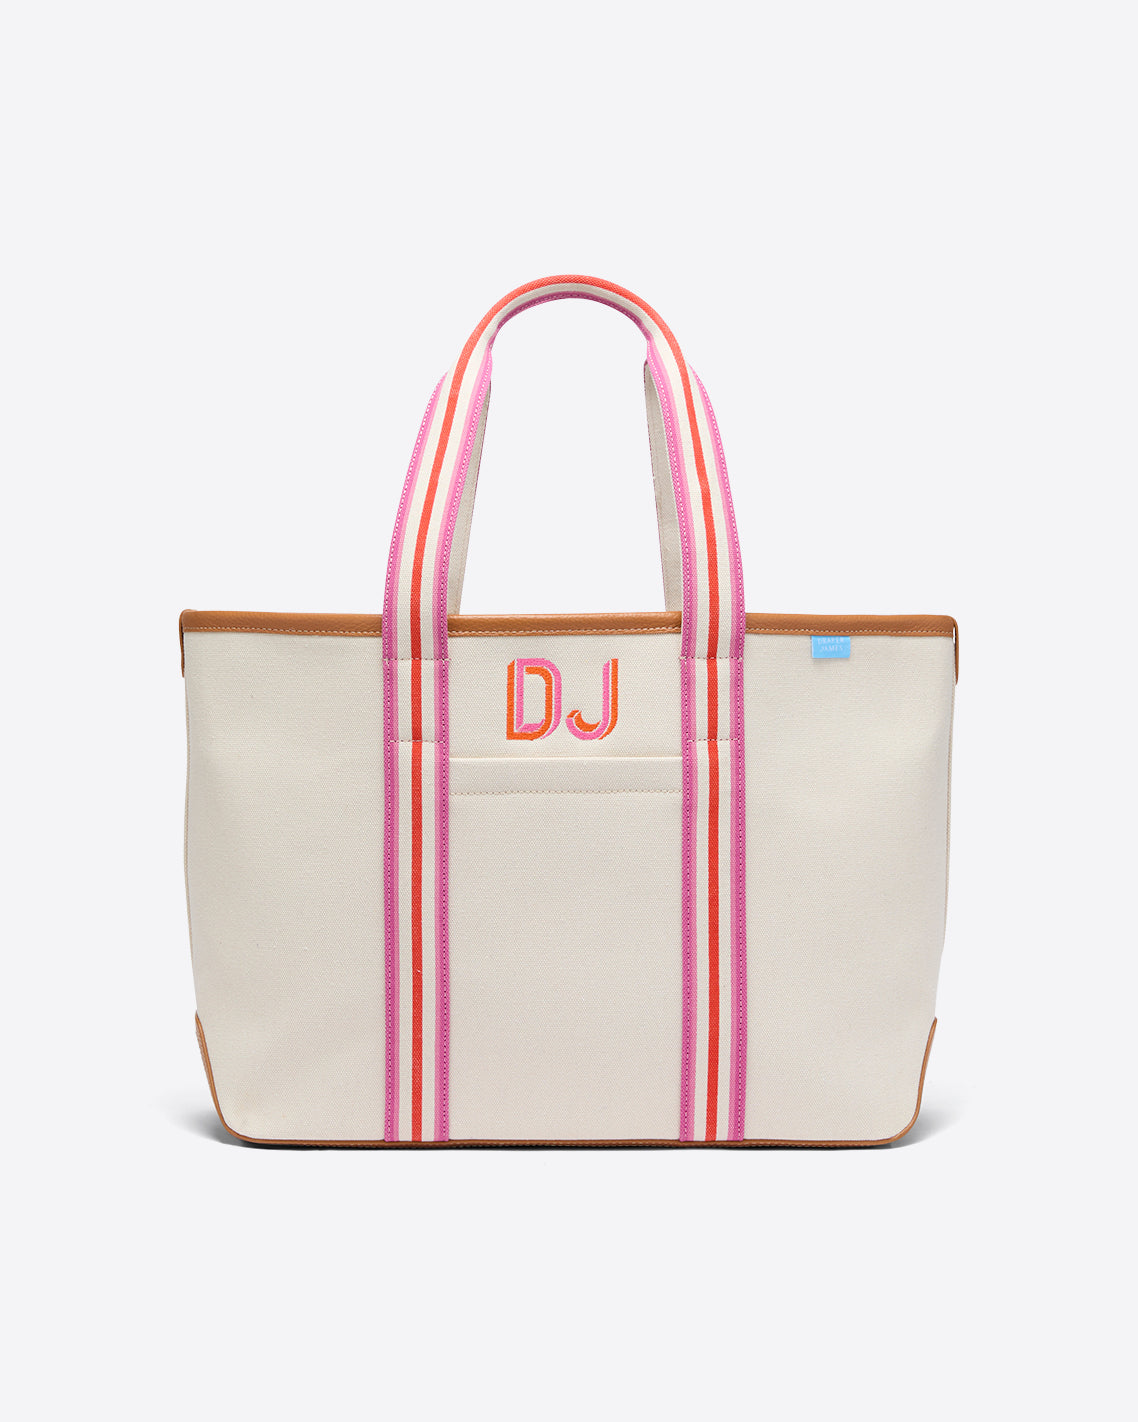 Reese's Limited-Edition Birthday Tote